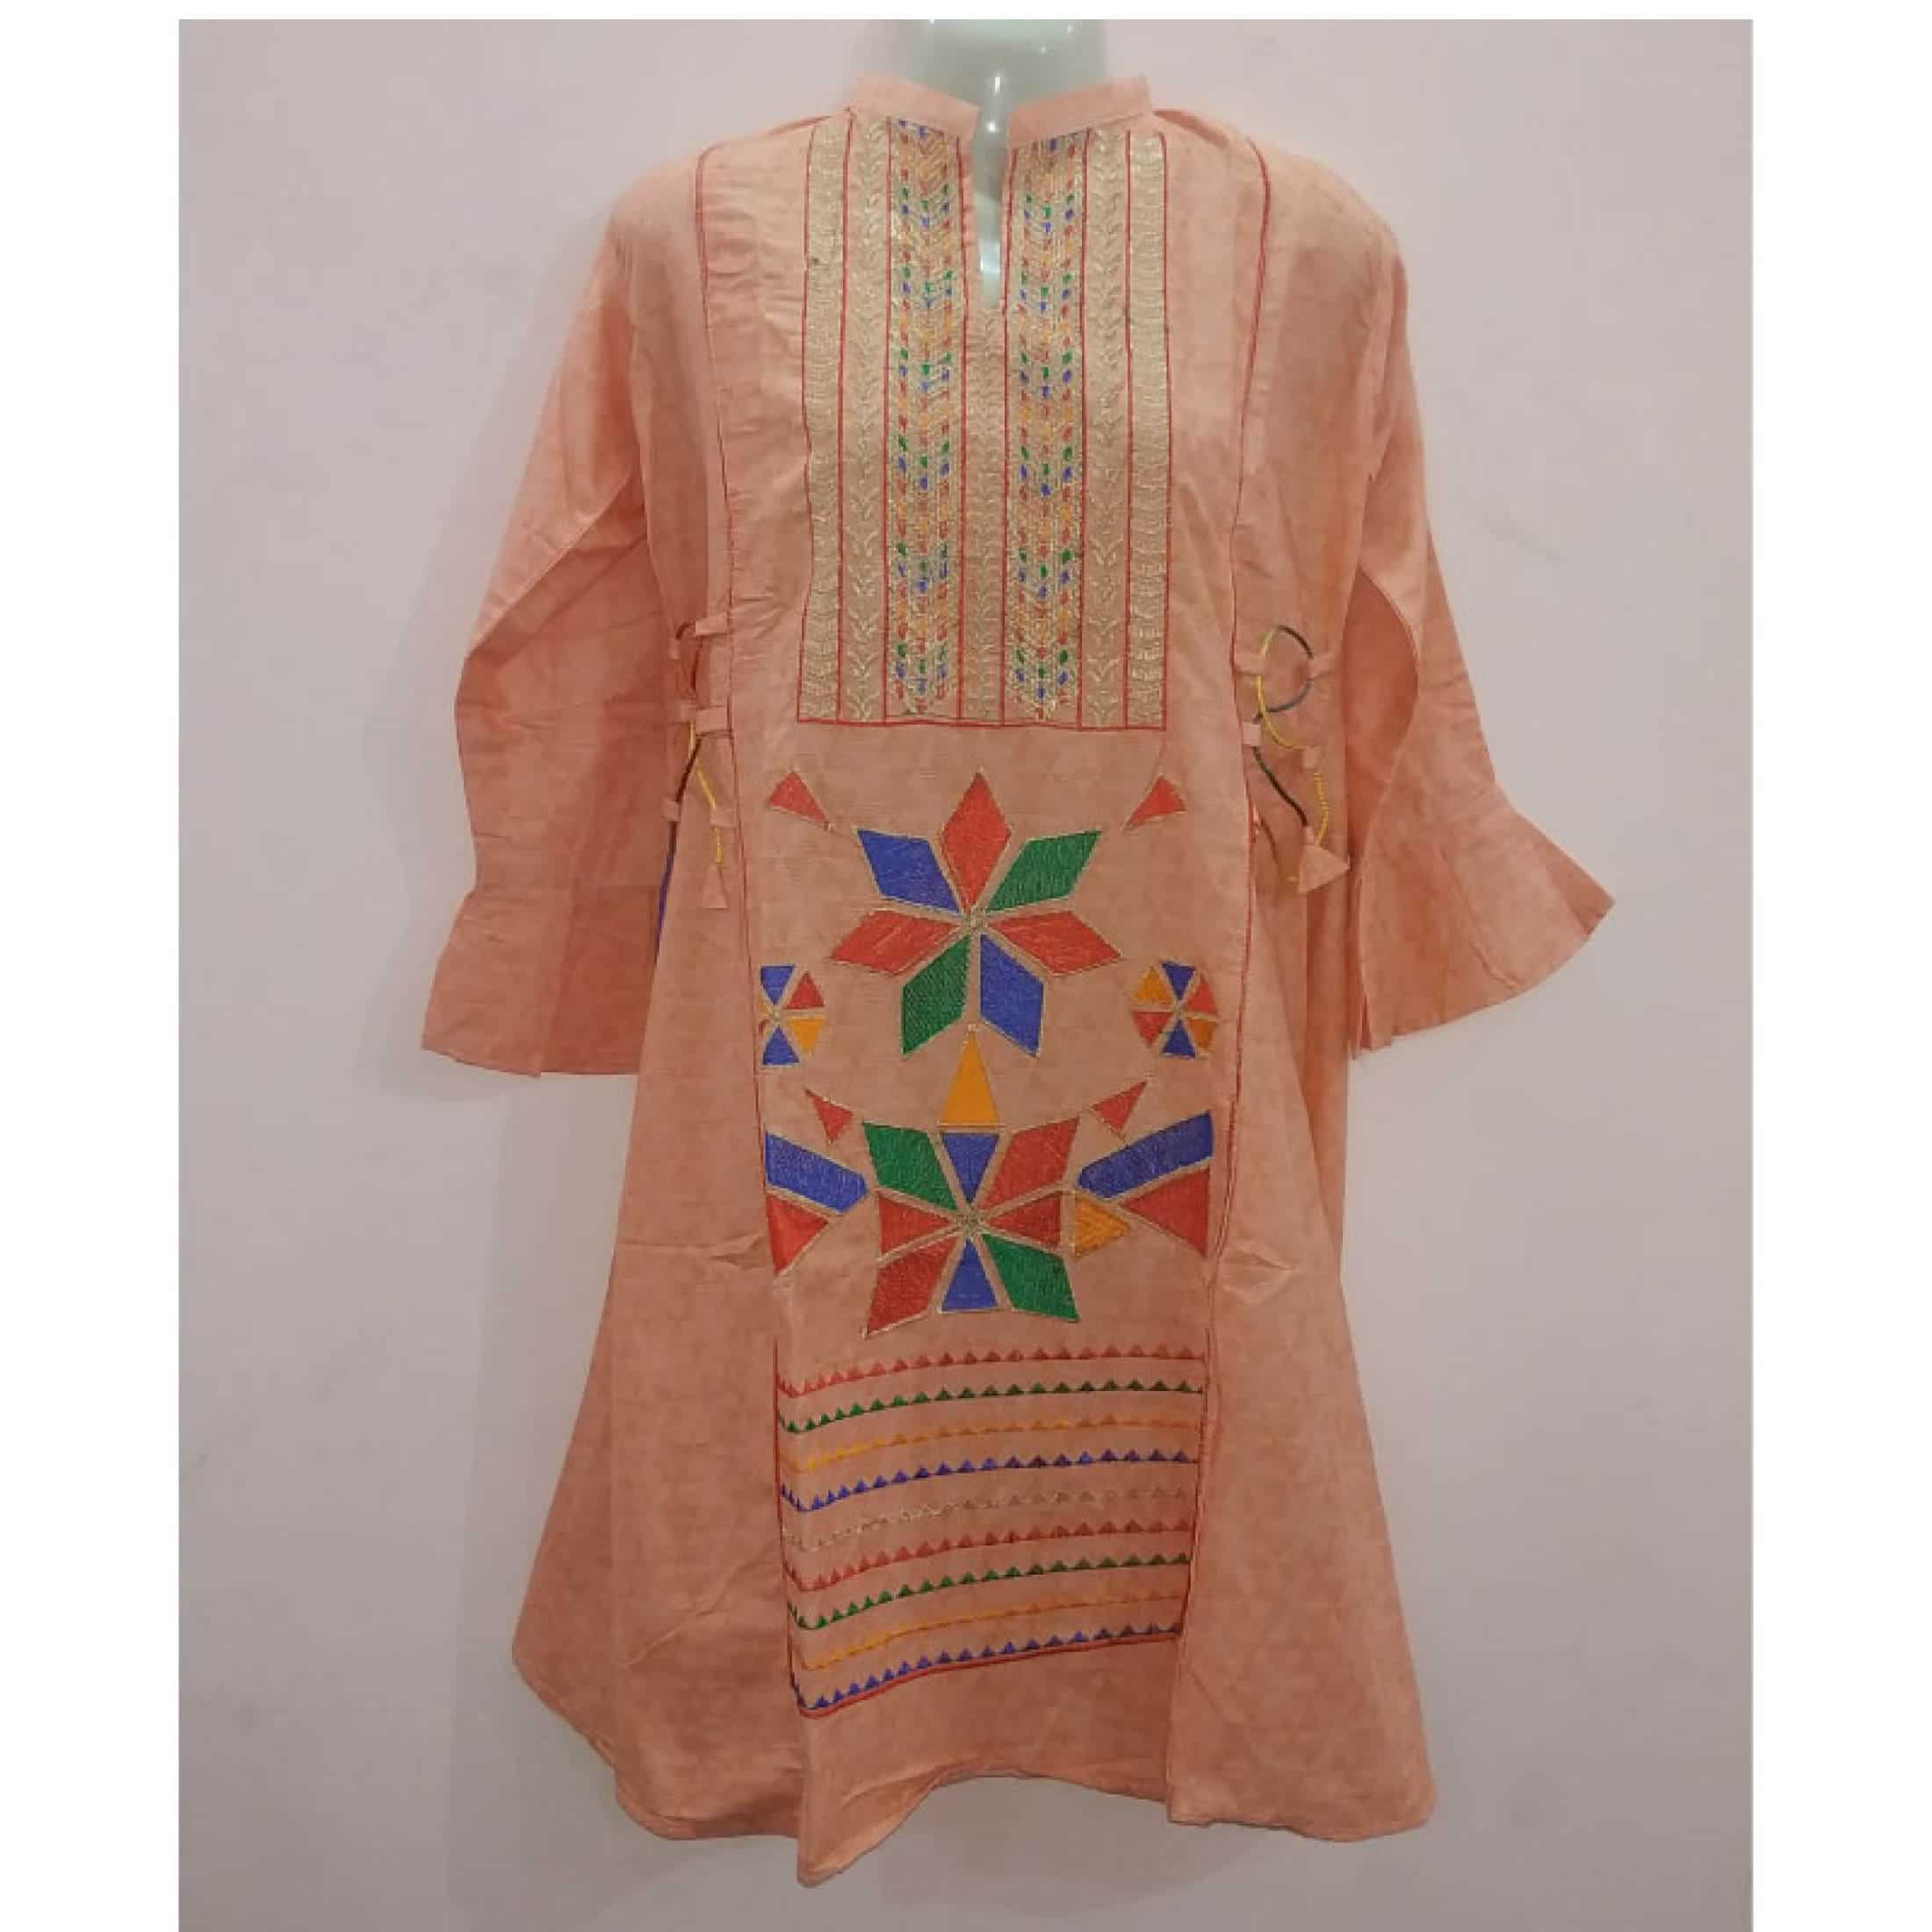 Online shopping for Kurti Sets in India | Hand embroidery designs,  Embroidery neck designs, Hand embroidery design patterns